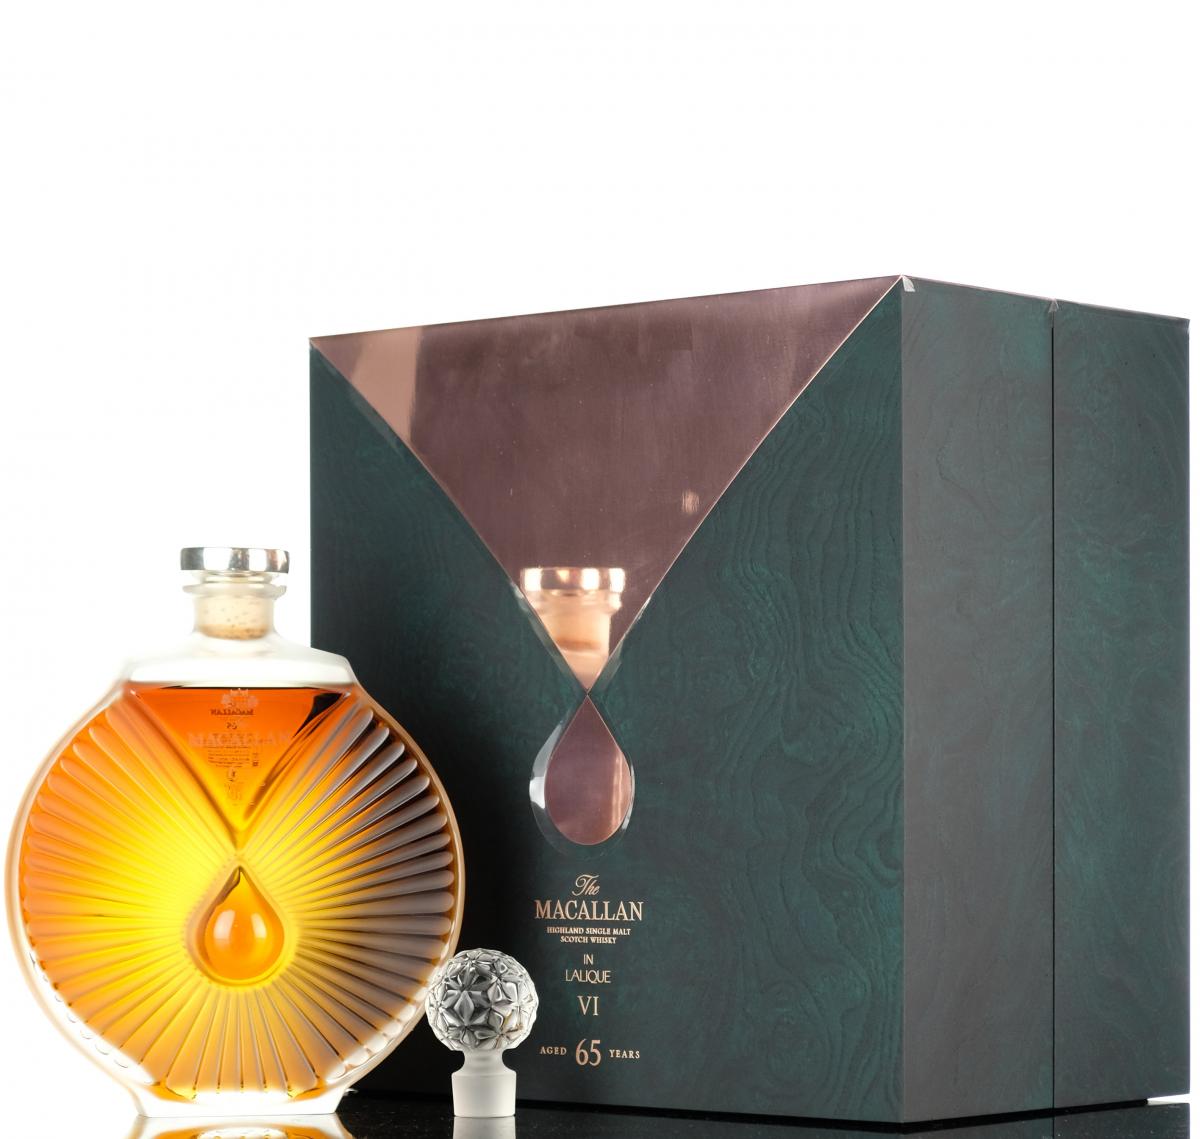 Macallan 65 Year Old - Lalique Decanter